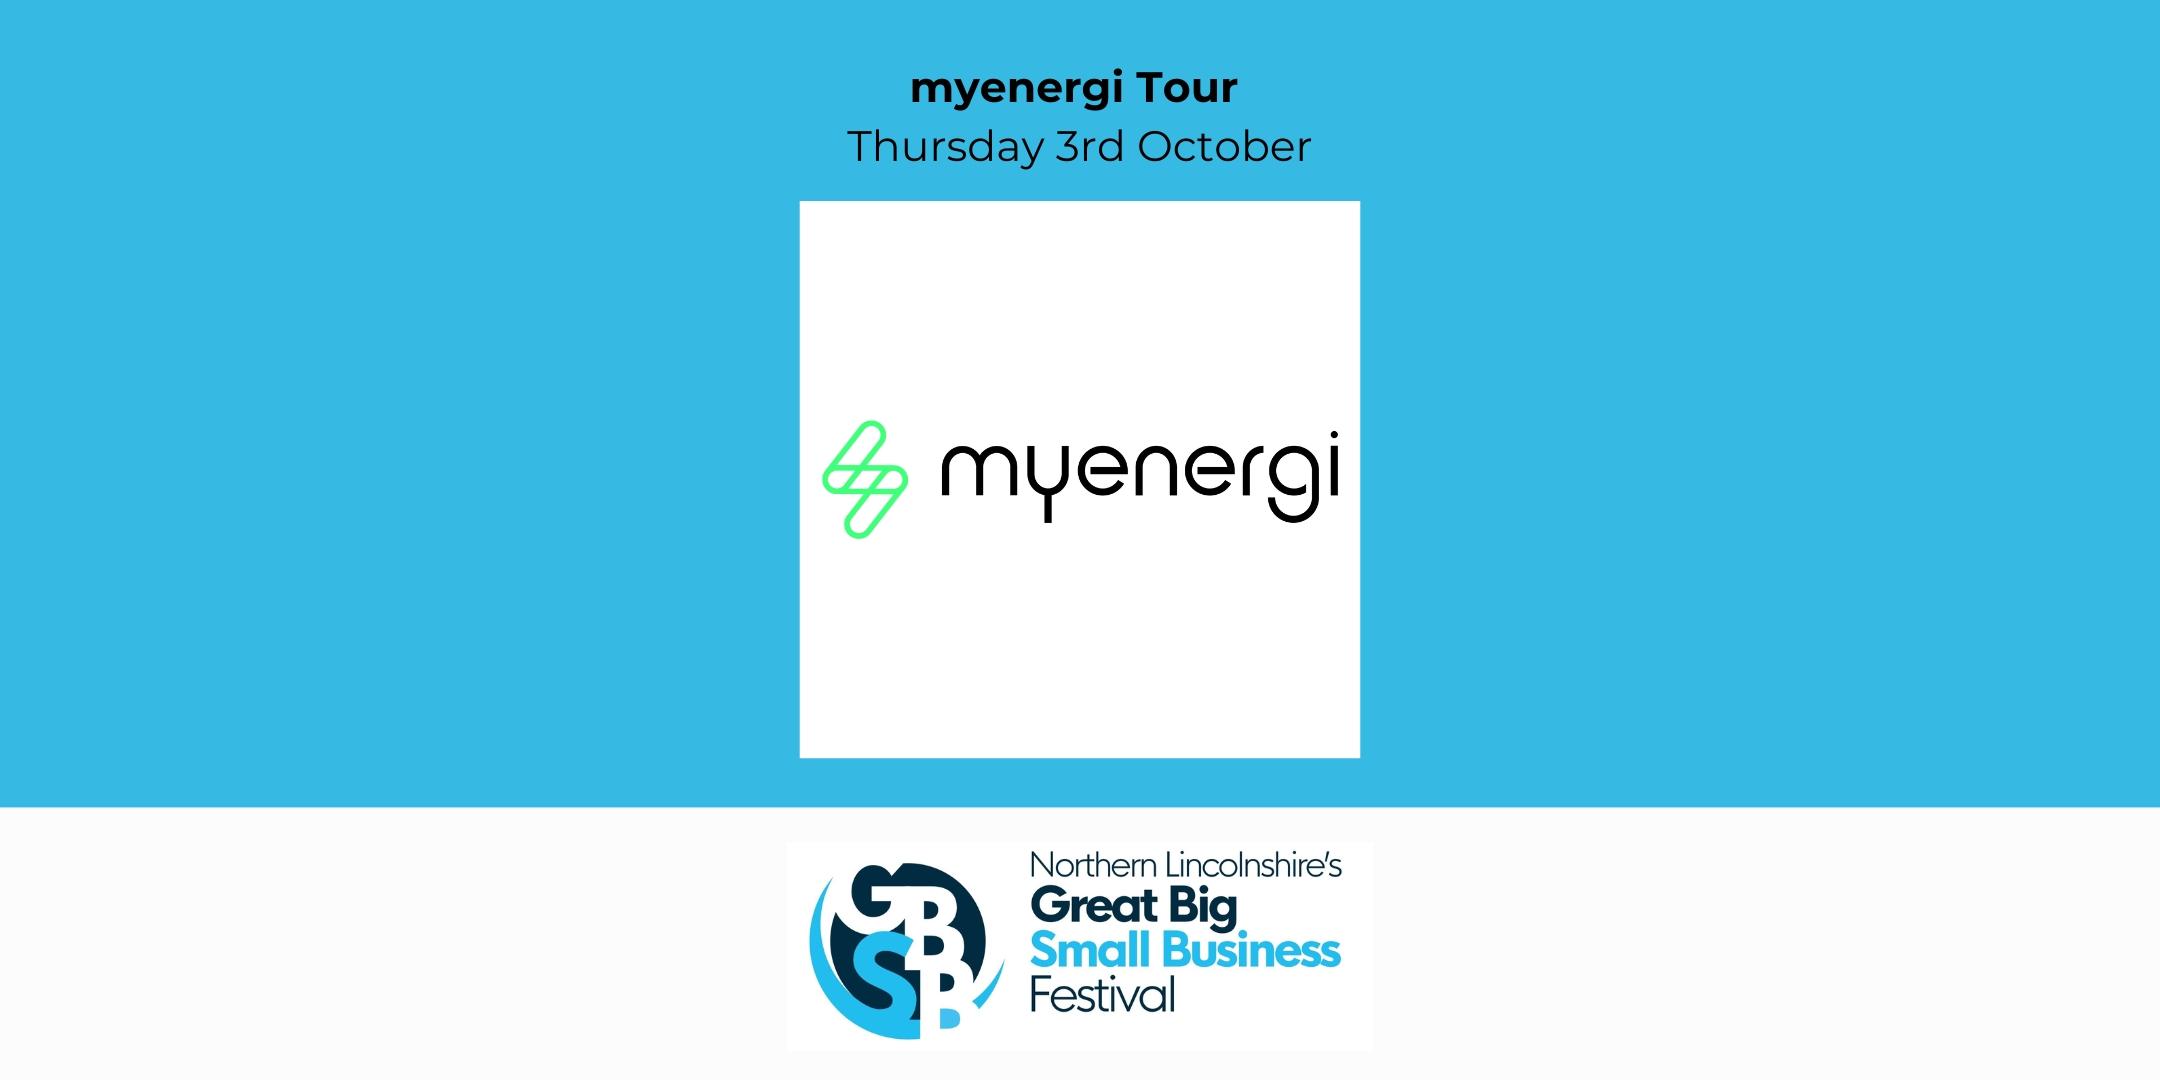 Join us for the myenergi Tour on Thursday, 3rd October. The event will showcase the myenergi logo alongside the GBSB Festival's emblem, all set against a vibrant blue background. Don't miss Northern Lincolnshire's Great Big Small Business Festival!